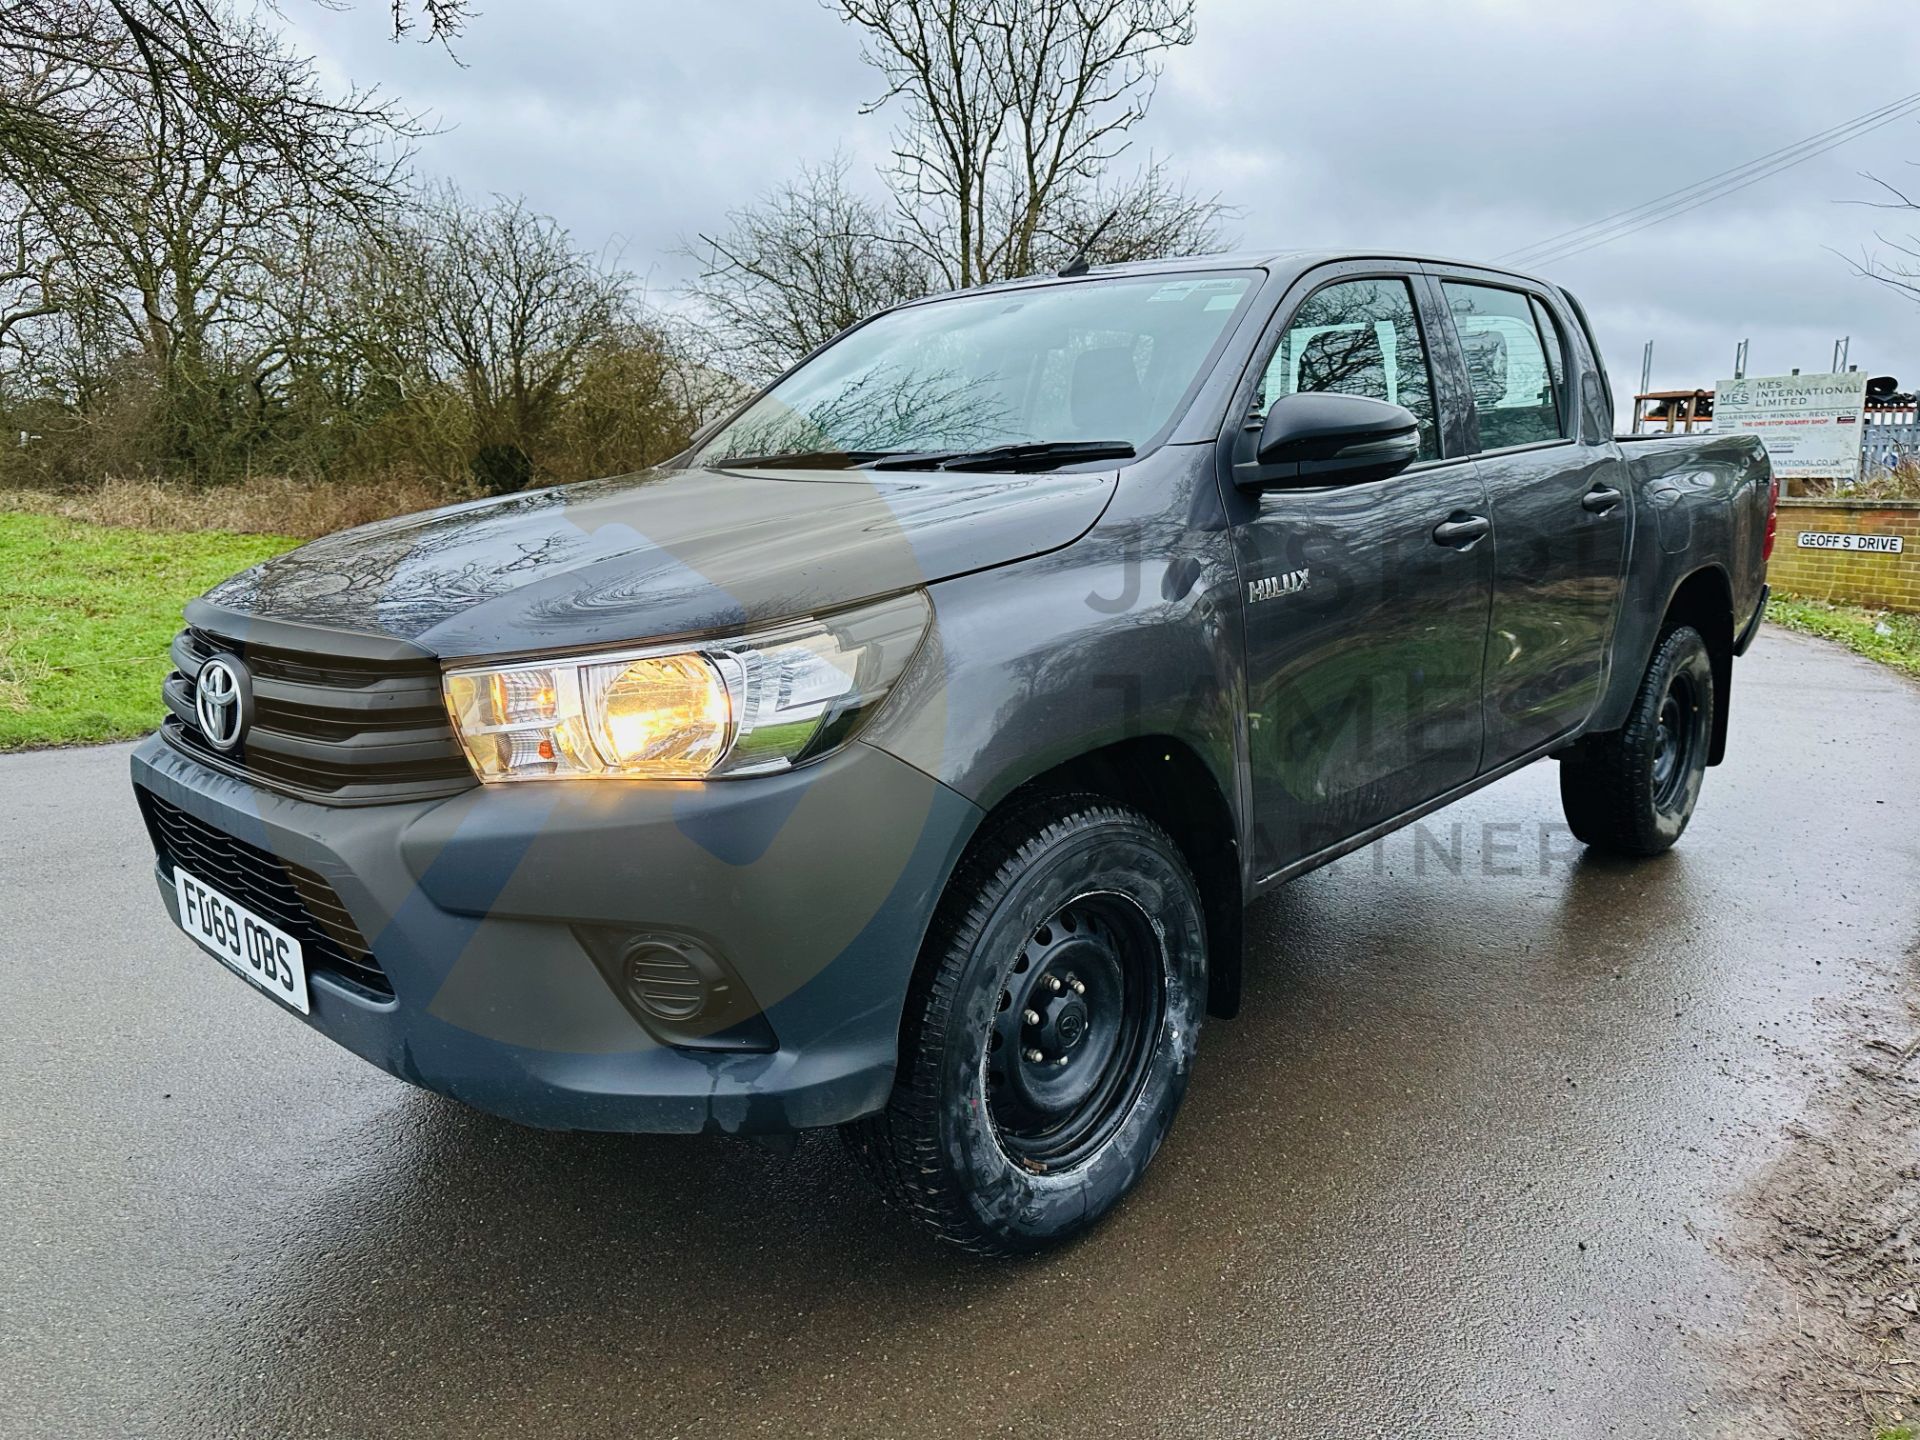 TOYOTA HILUX 2.4 D4-D "ACTIVE" D/CAB 4 DOOR - 2020 MODEL - 1 OWNER - ONLY 41K MILES - AIR CON - LOOK - Image 6 of 32